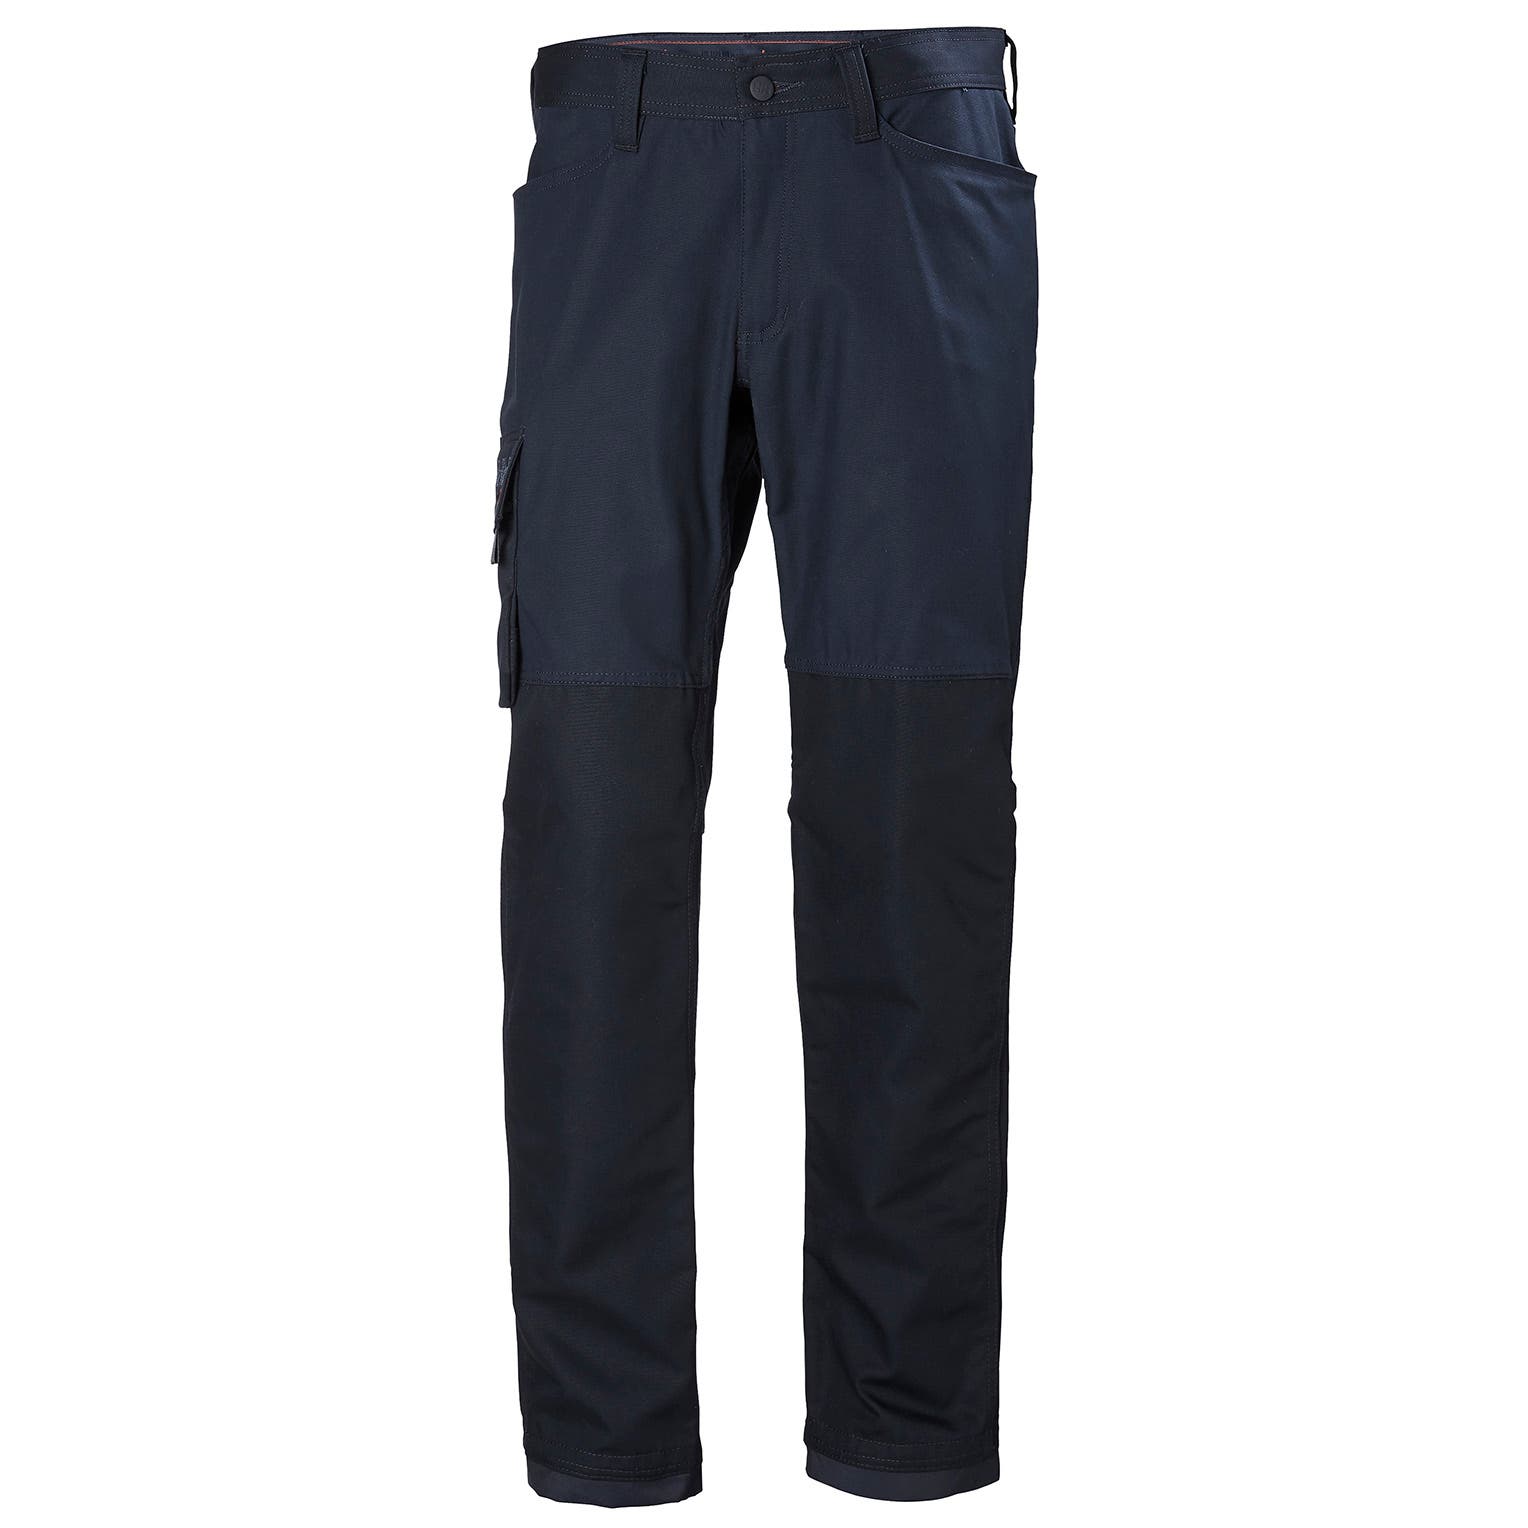 Helly Hansen Men's Oxford Service Na Pant in Navy from the front